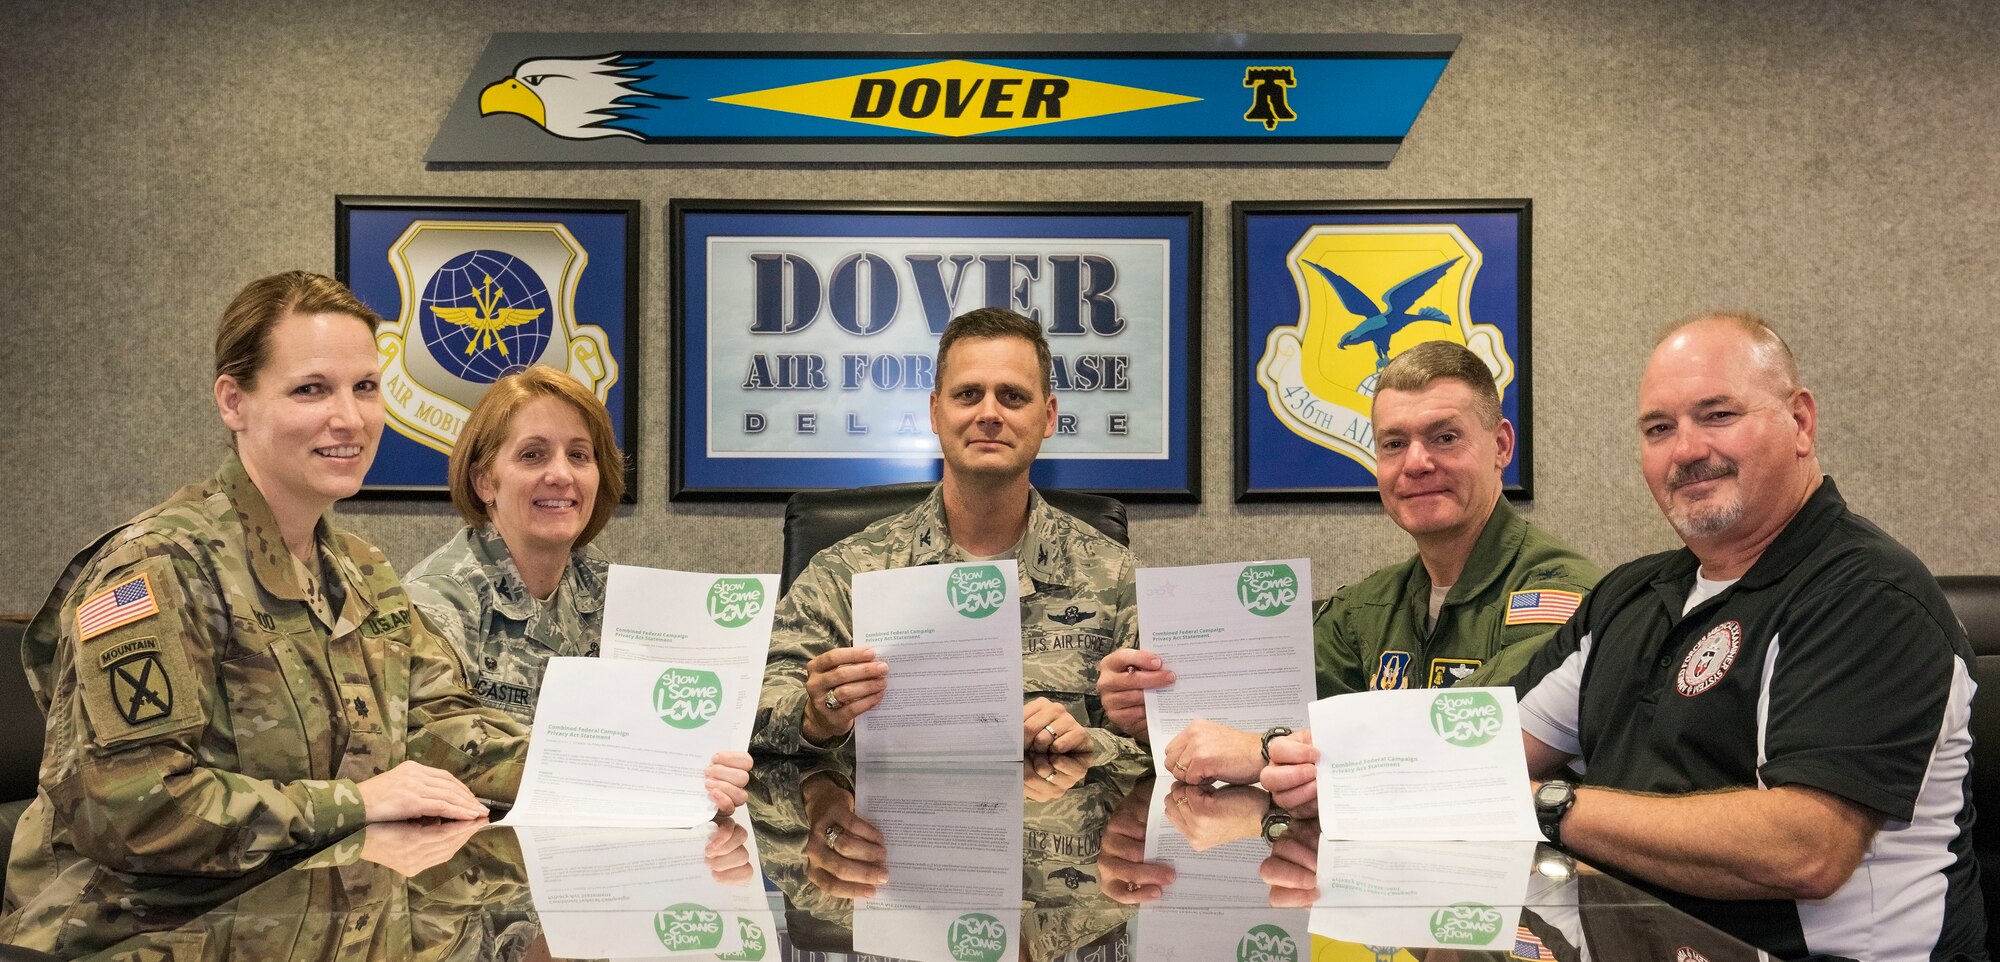 From left, Lt. Col. Laura Wood, Joint Personal Effects Depot commander; Col. Dawn Lancaster, Air Force Mortuary Affairs Operations commander; Col. Joel Safranek, 436th Airlift Wing commander; Col. Craig Peters, 512th Airlift Wing commander; and Rick Gates, Armed Forces Medical Examiner System operations officer, sign their 2018 Combined Federal Campaign pledge forms Oct. 10, 2018, at Dover Air Force Base, Del. The CFC started Oct. 15 and concludes Nov. 16, 2018. Contributions can be made by submitting a paper pledge form or online. (U.S. Air Force photo by Roland Balik)